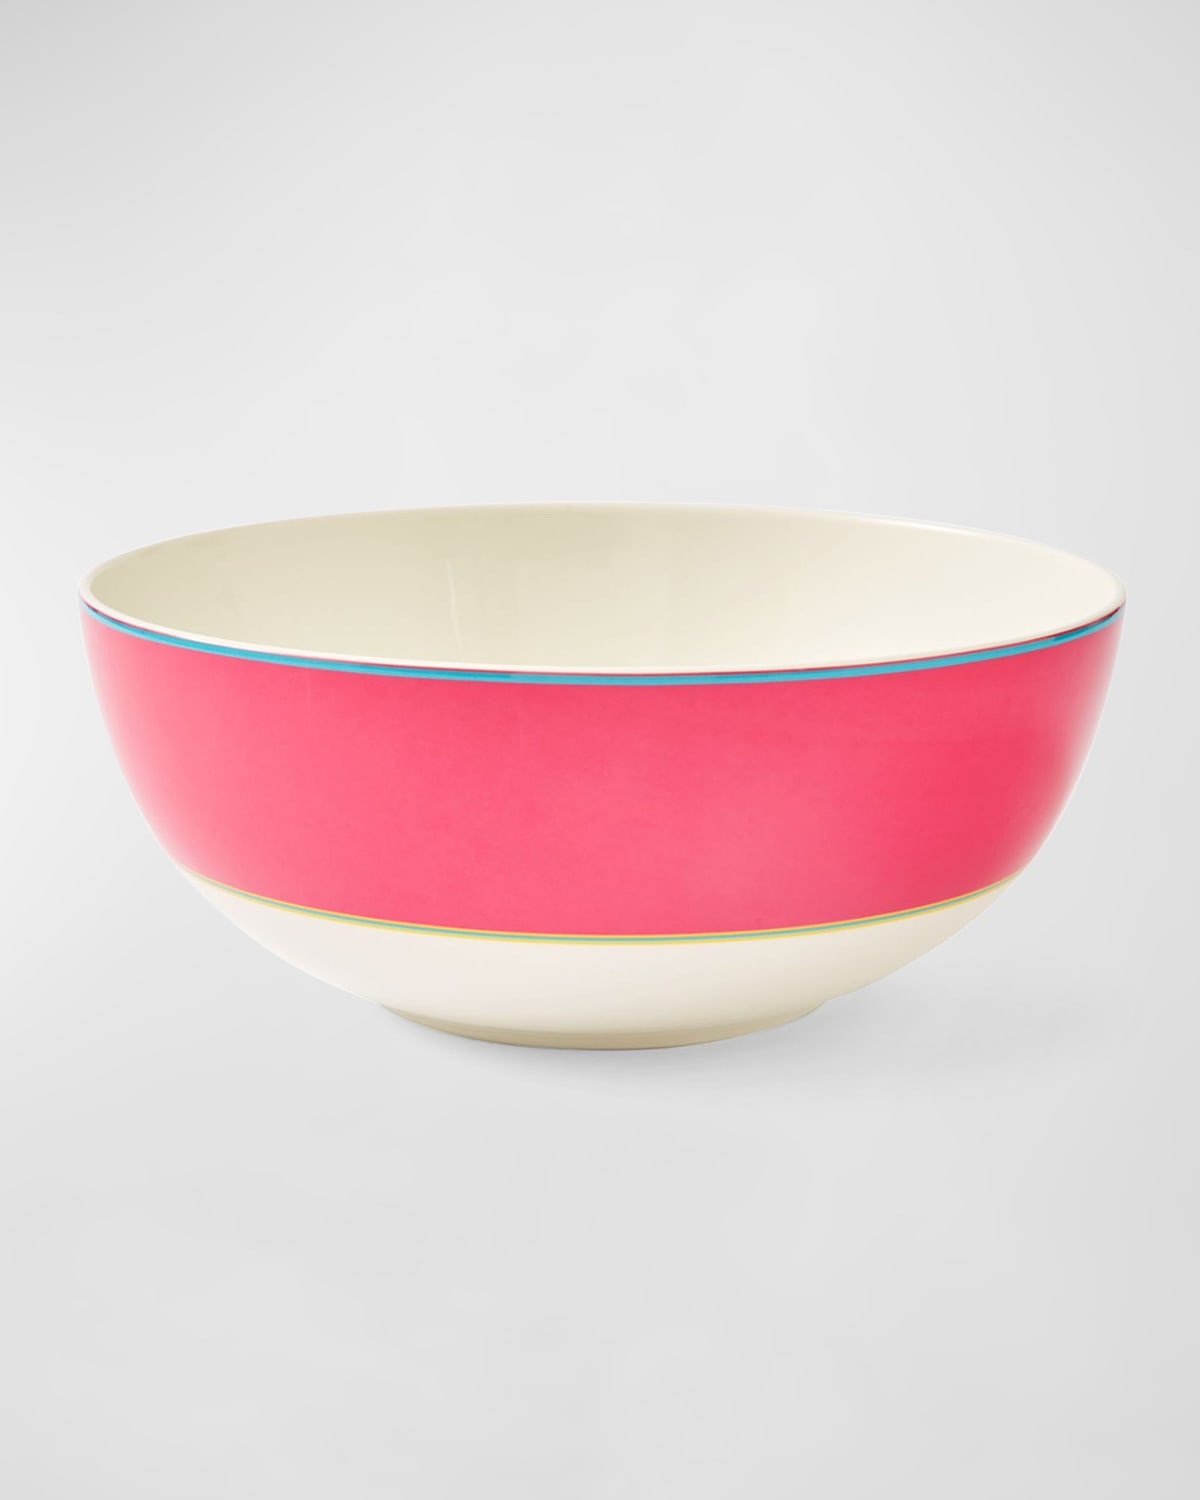 Kit Kemp For Spode Calypso Serving Bowl, 10" In Pink